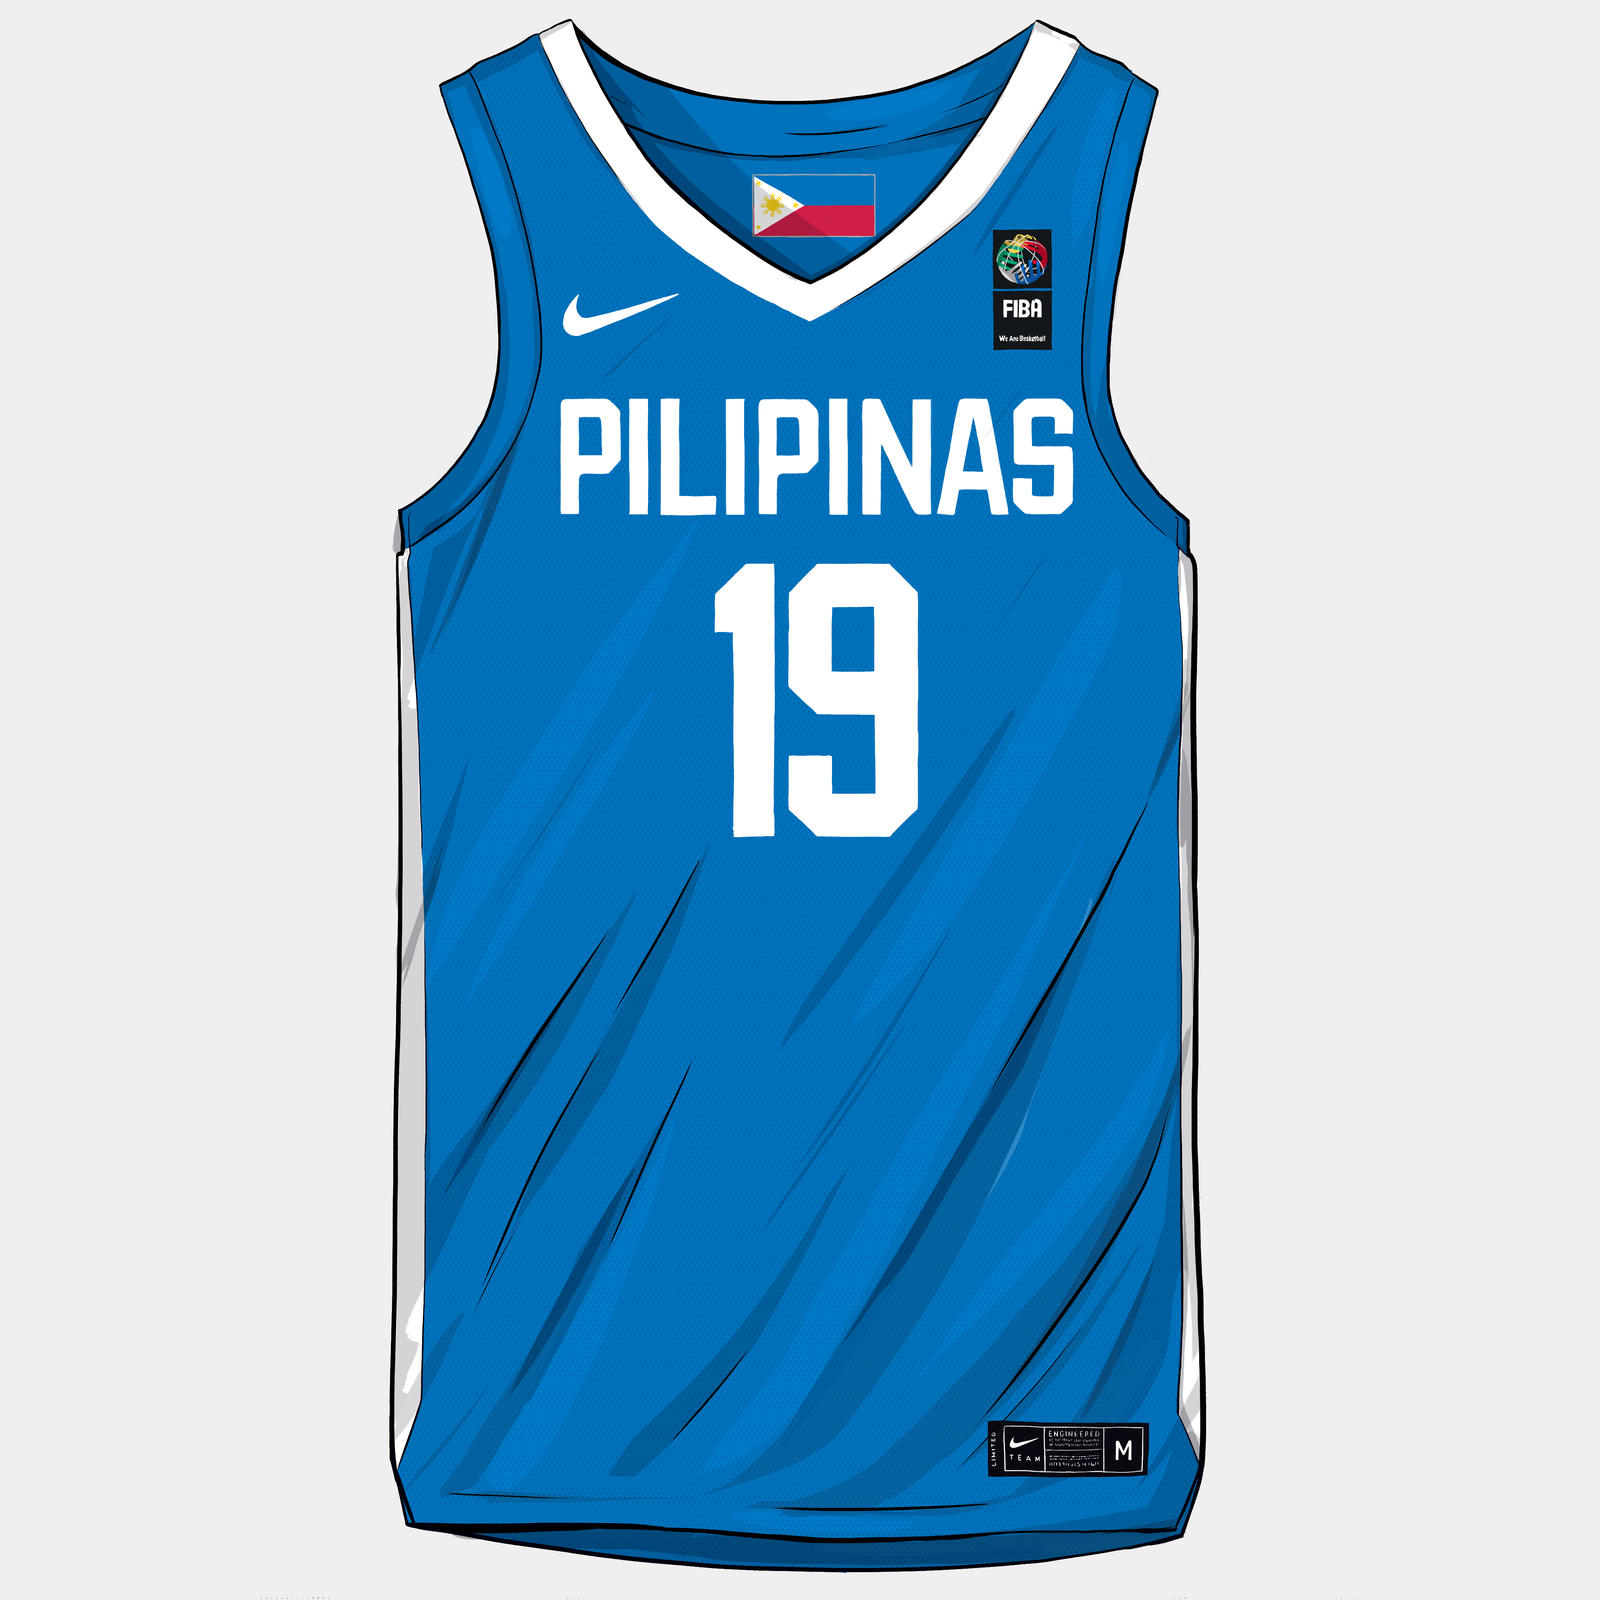 New Gilas Pilipinas Jersey for the FIBA World Cup 2019 Gilas